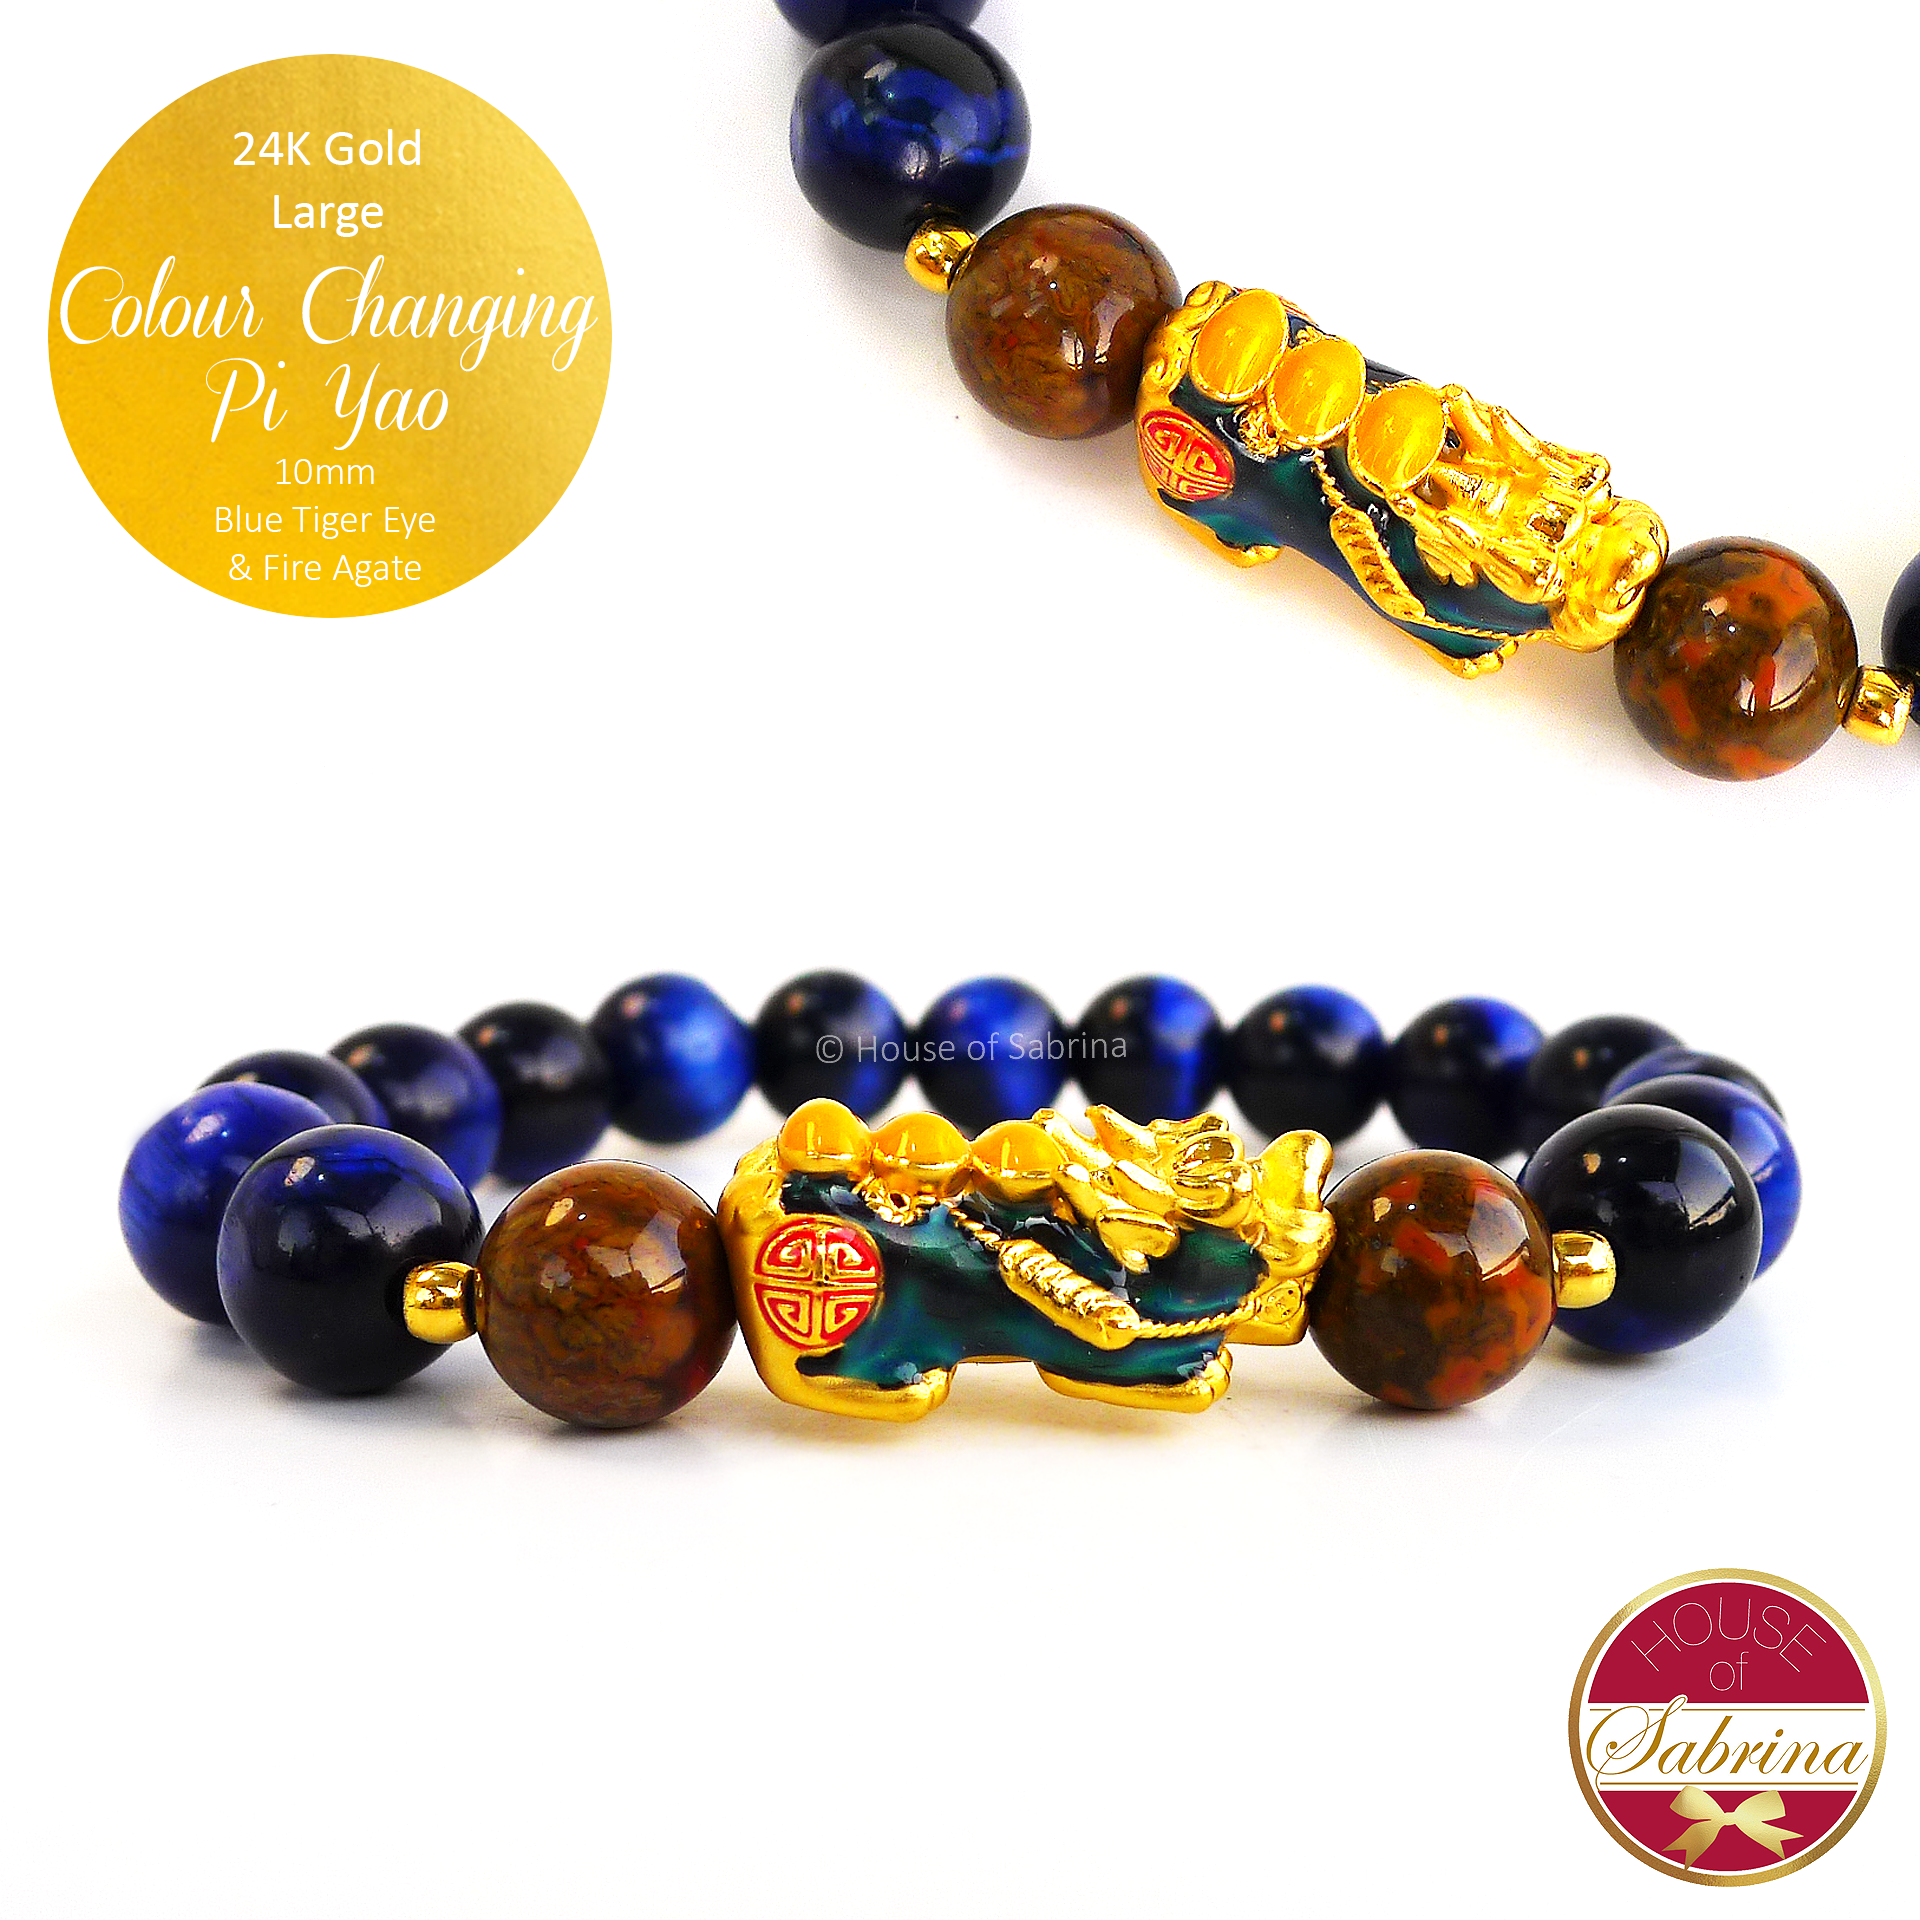 24K Gold Large Colour Changing Pi Yao on High Grade Blue Tiger Eye and Fire Agate Gemstone Bracelet